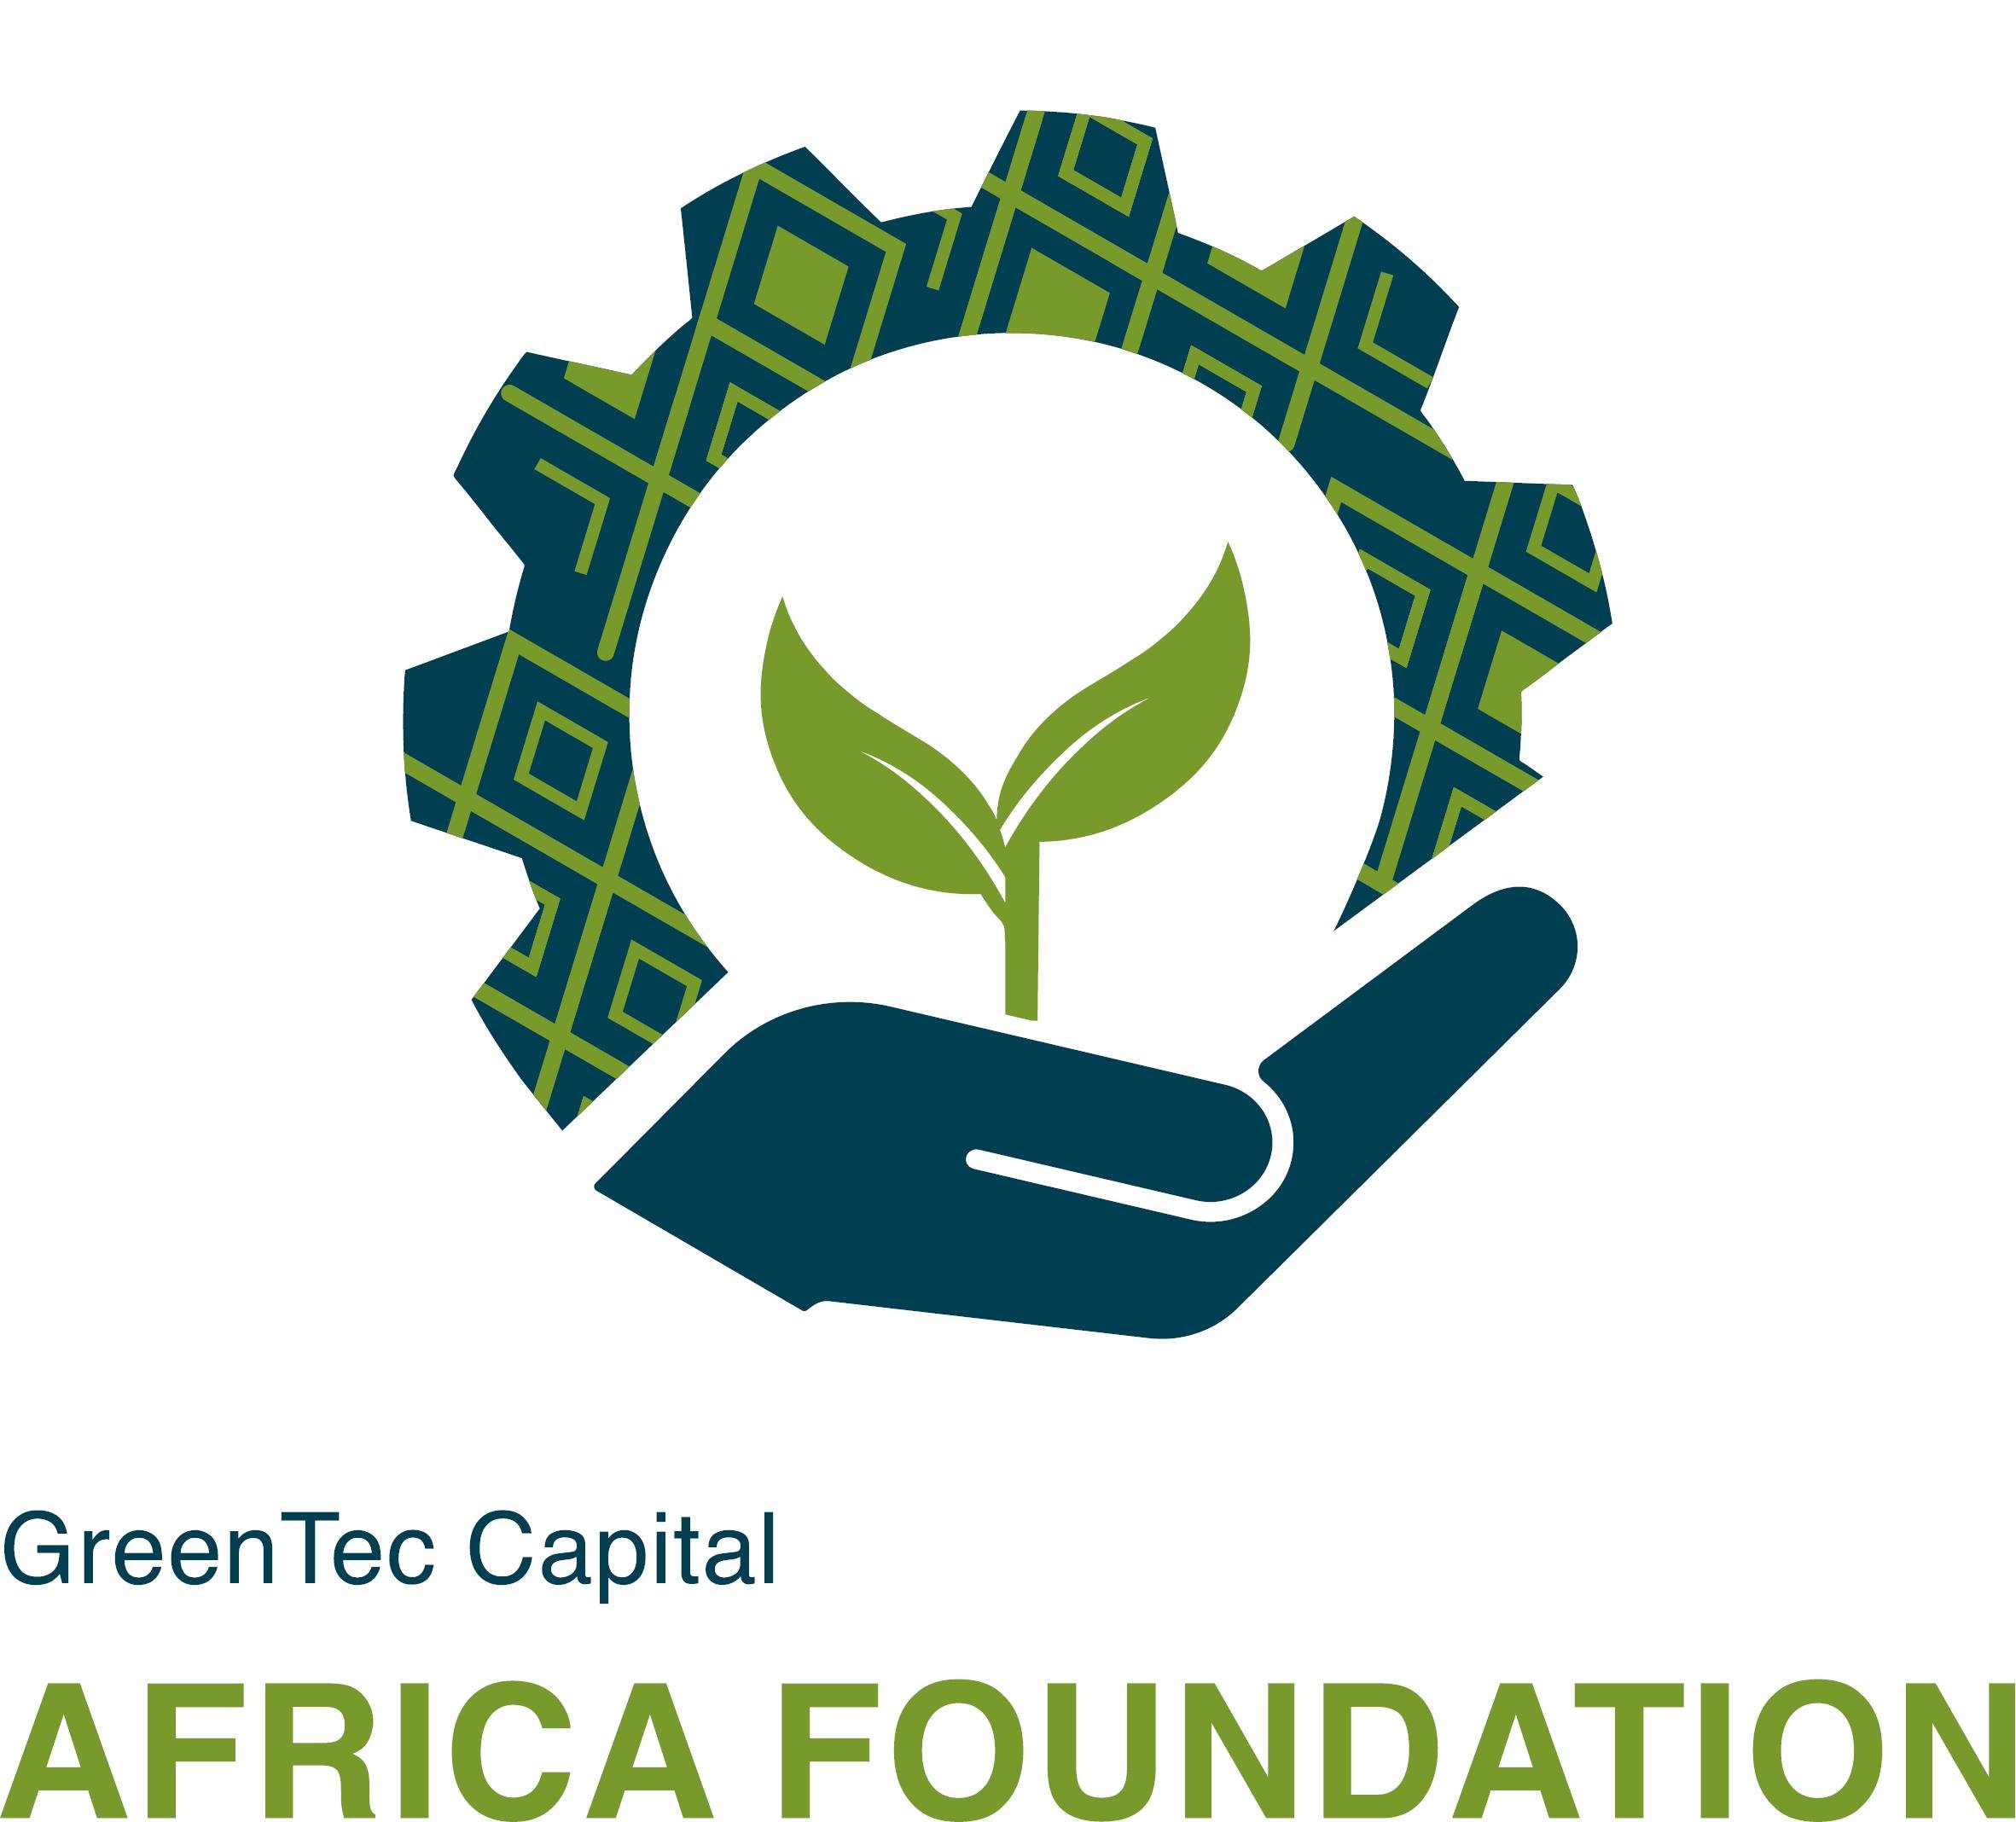 The GreenTec Capital Africa Foundation (GCAF) is a non-profit organization founded to promote the development of investment in African entrepreneurship.